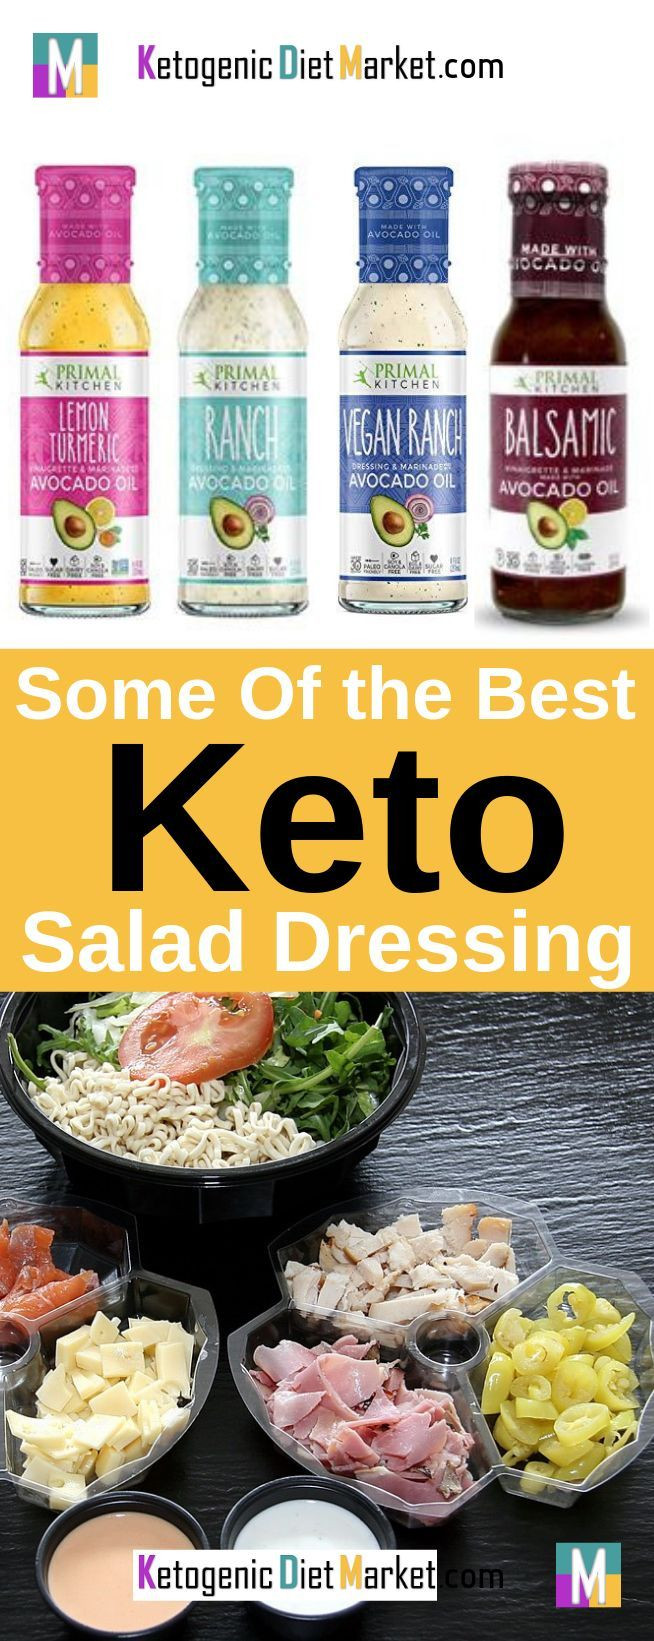 Best Salad Dressings For Diets
 Best Keto Salad Dressing With images